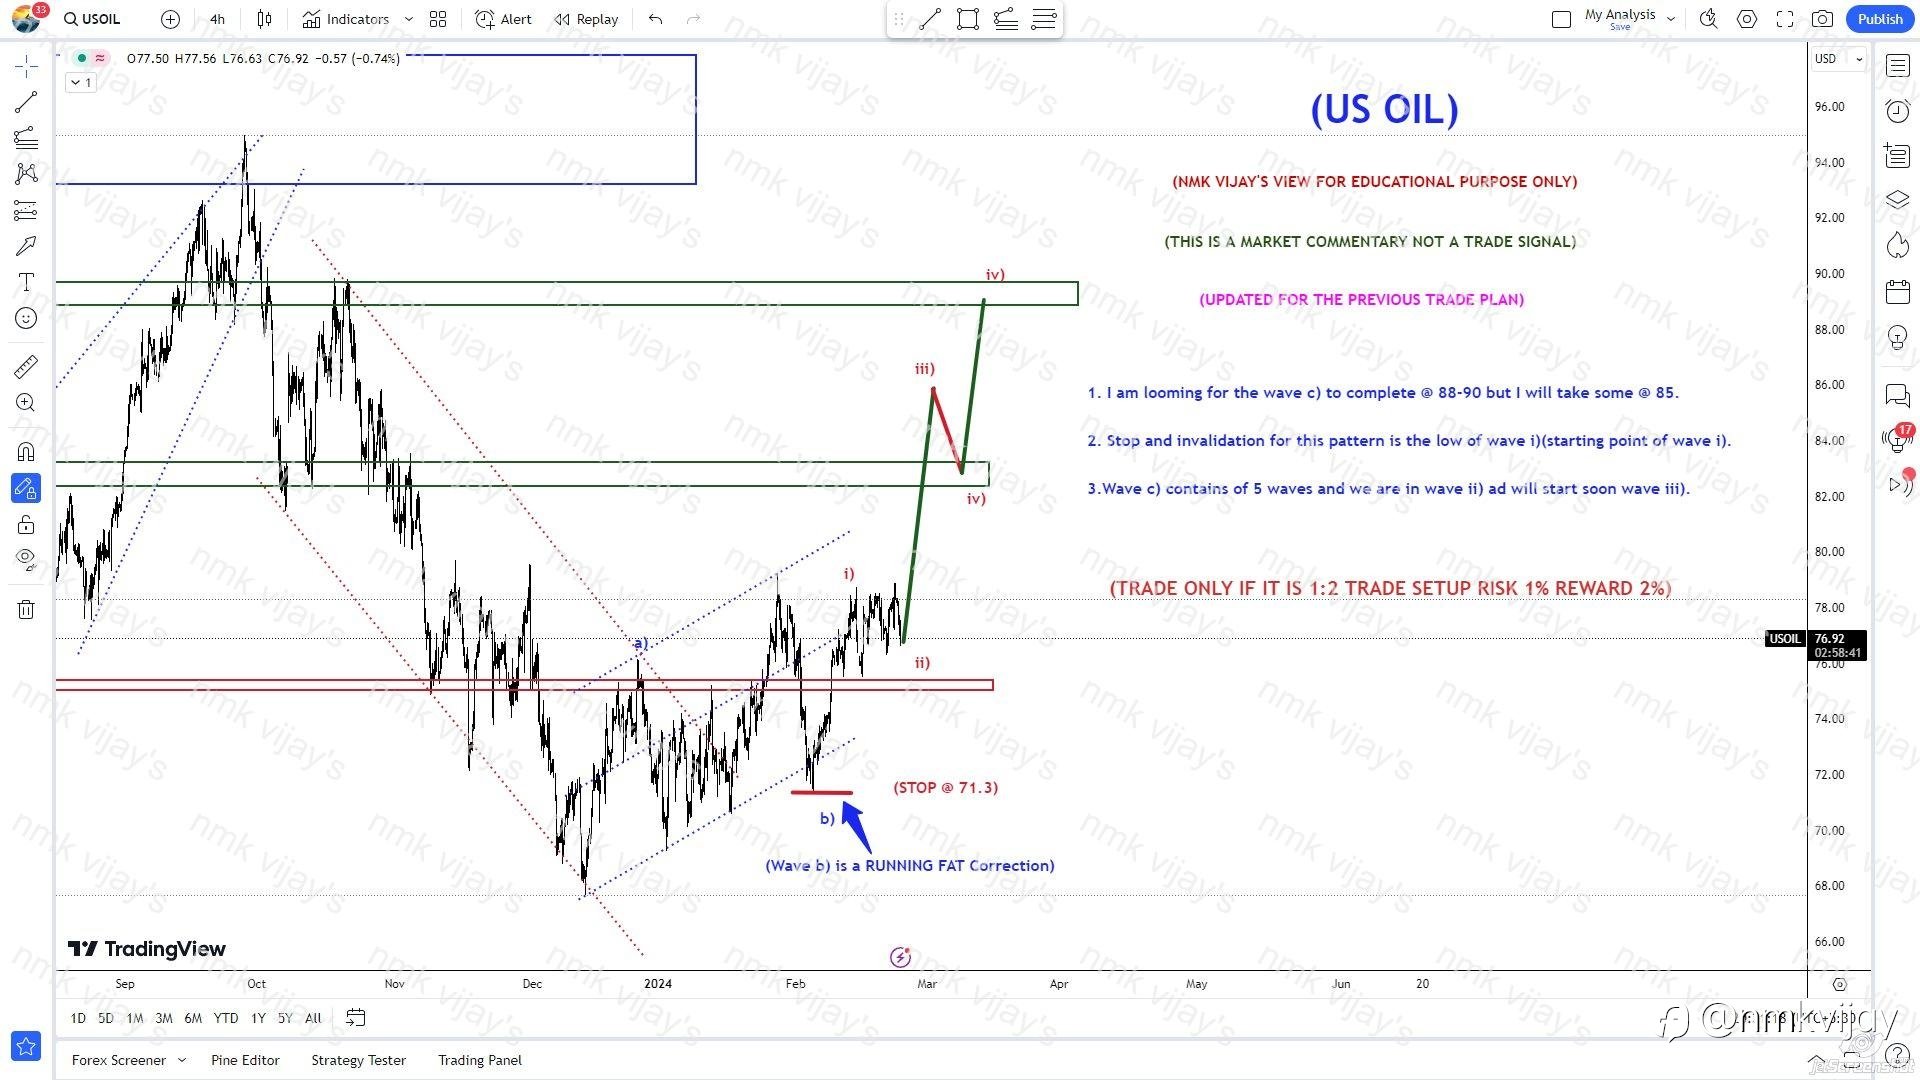 CRUDEOIL: Wave iii) of C) started ? TP 88-90 ?